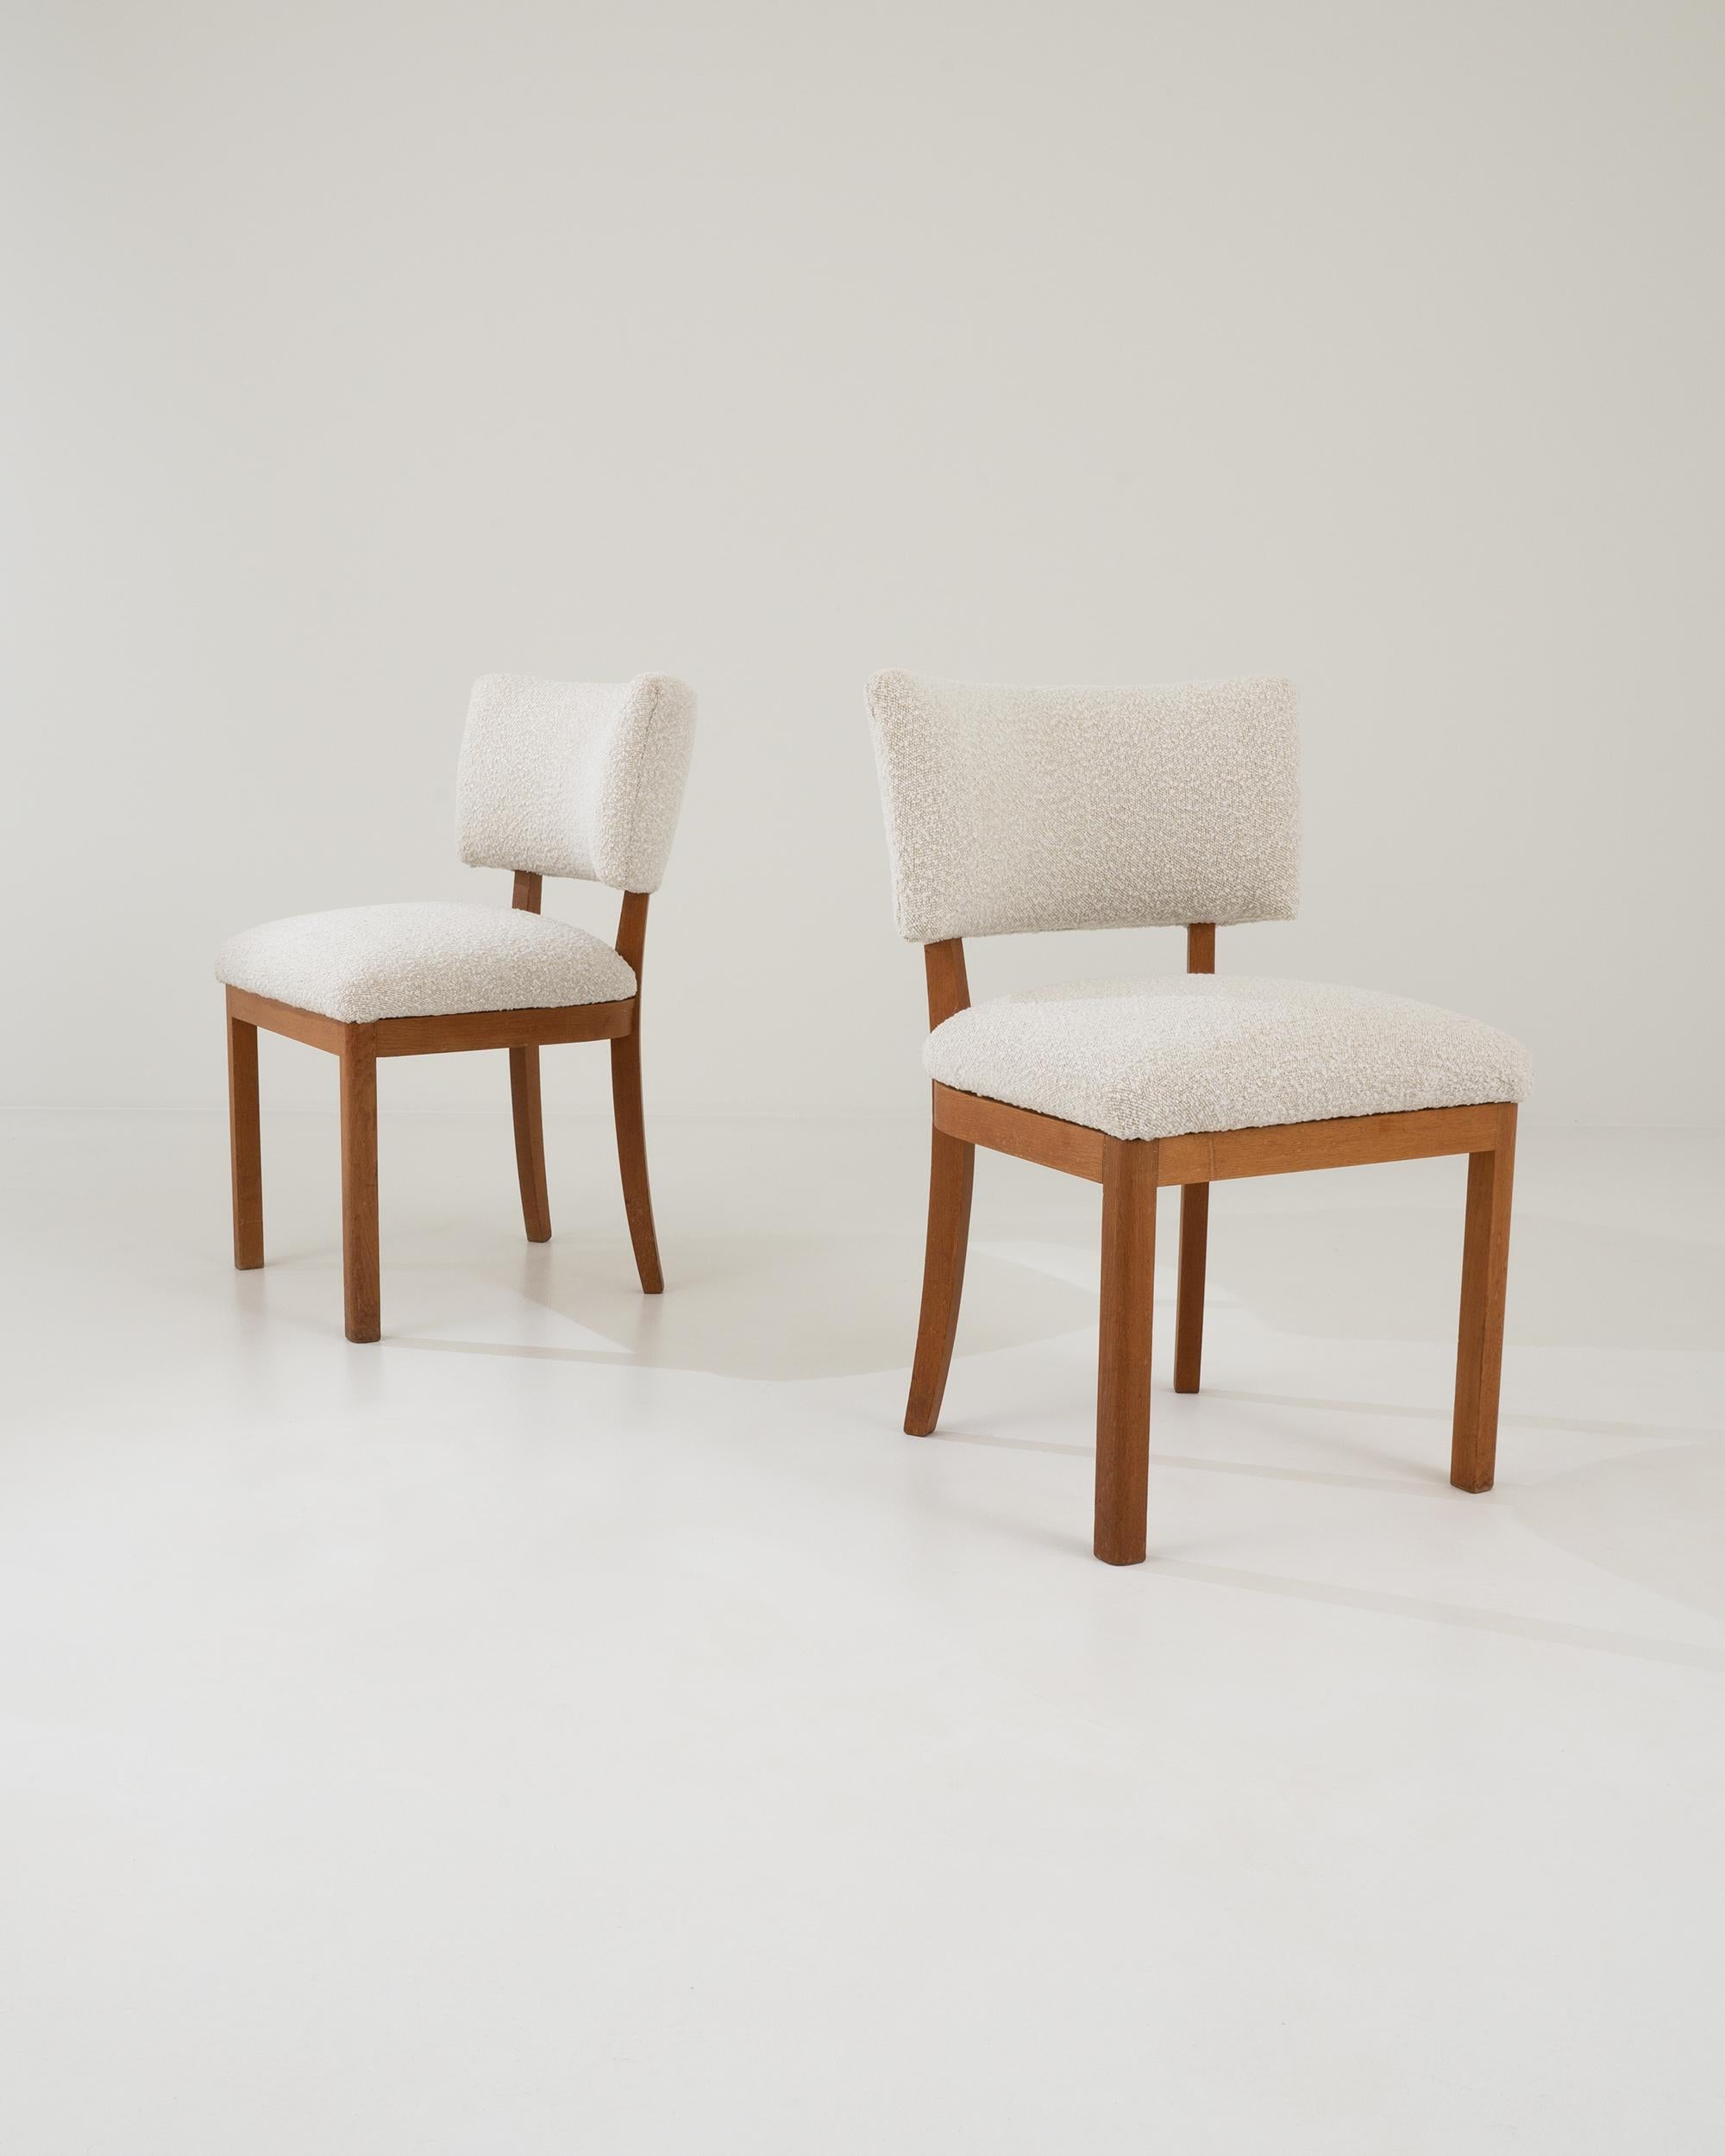 20th Century Czech Upholstered Dining Chairs, a Pair In Good Condition For Sale In High Point, NC